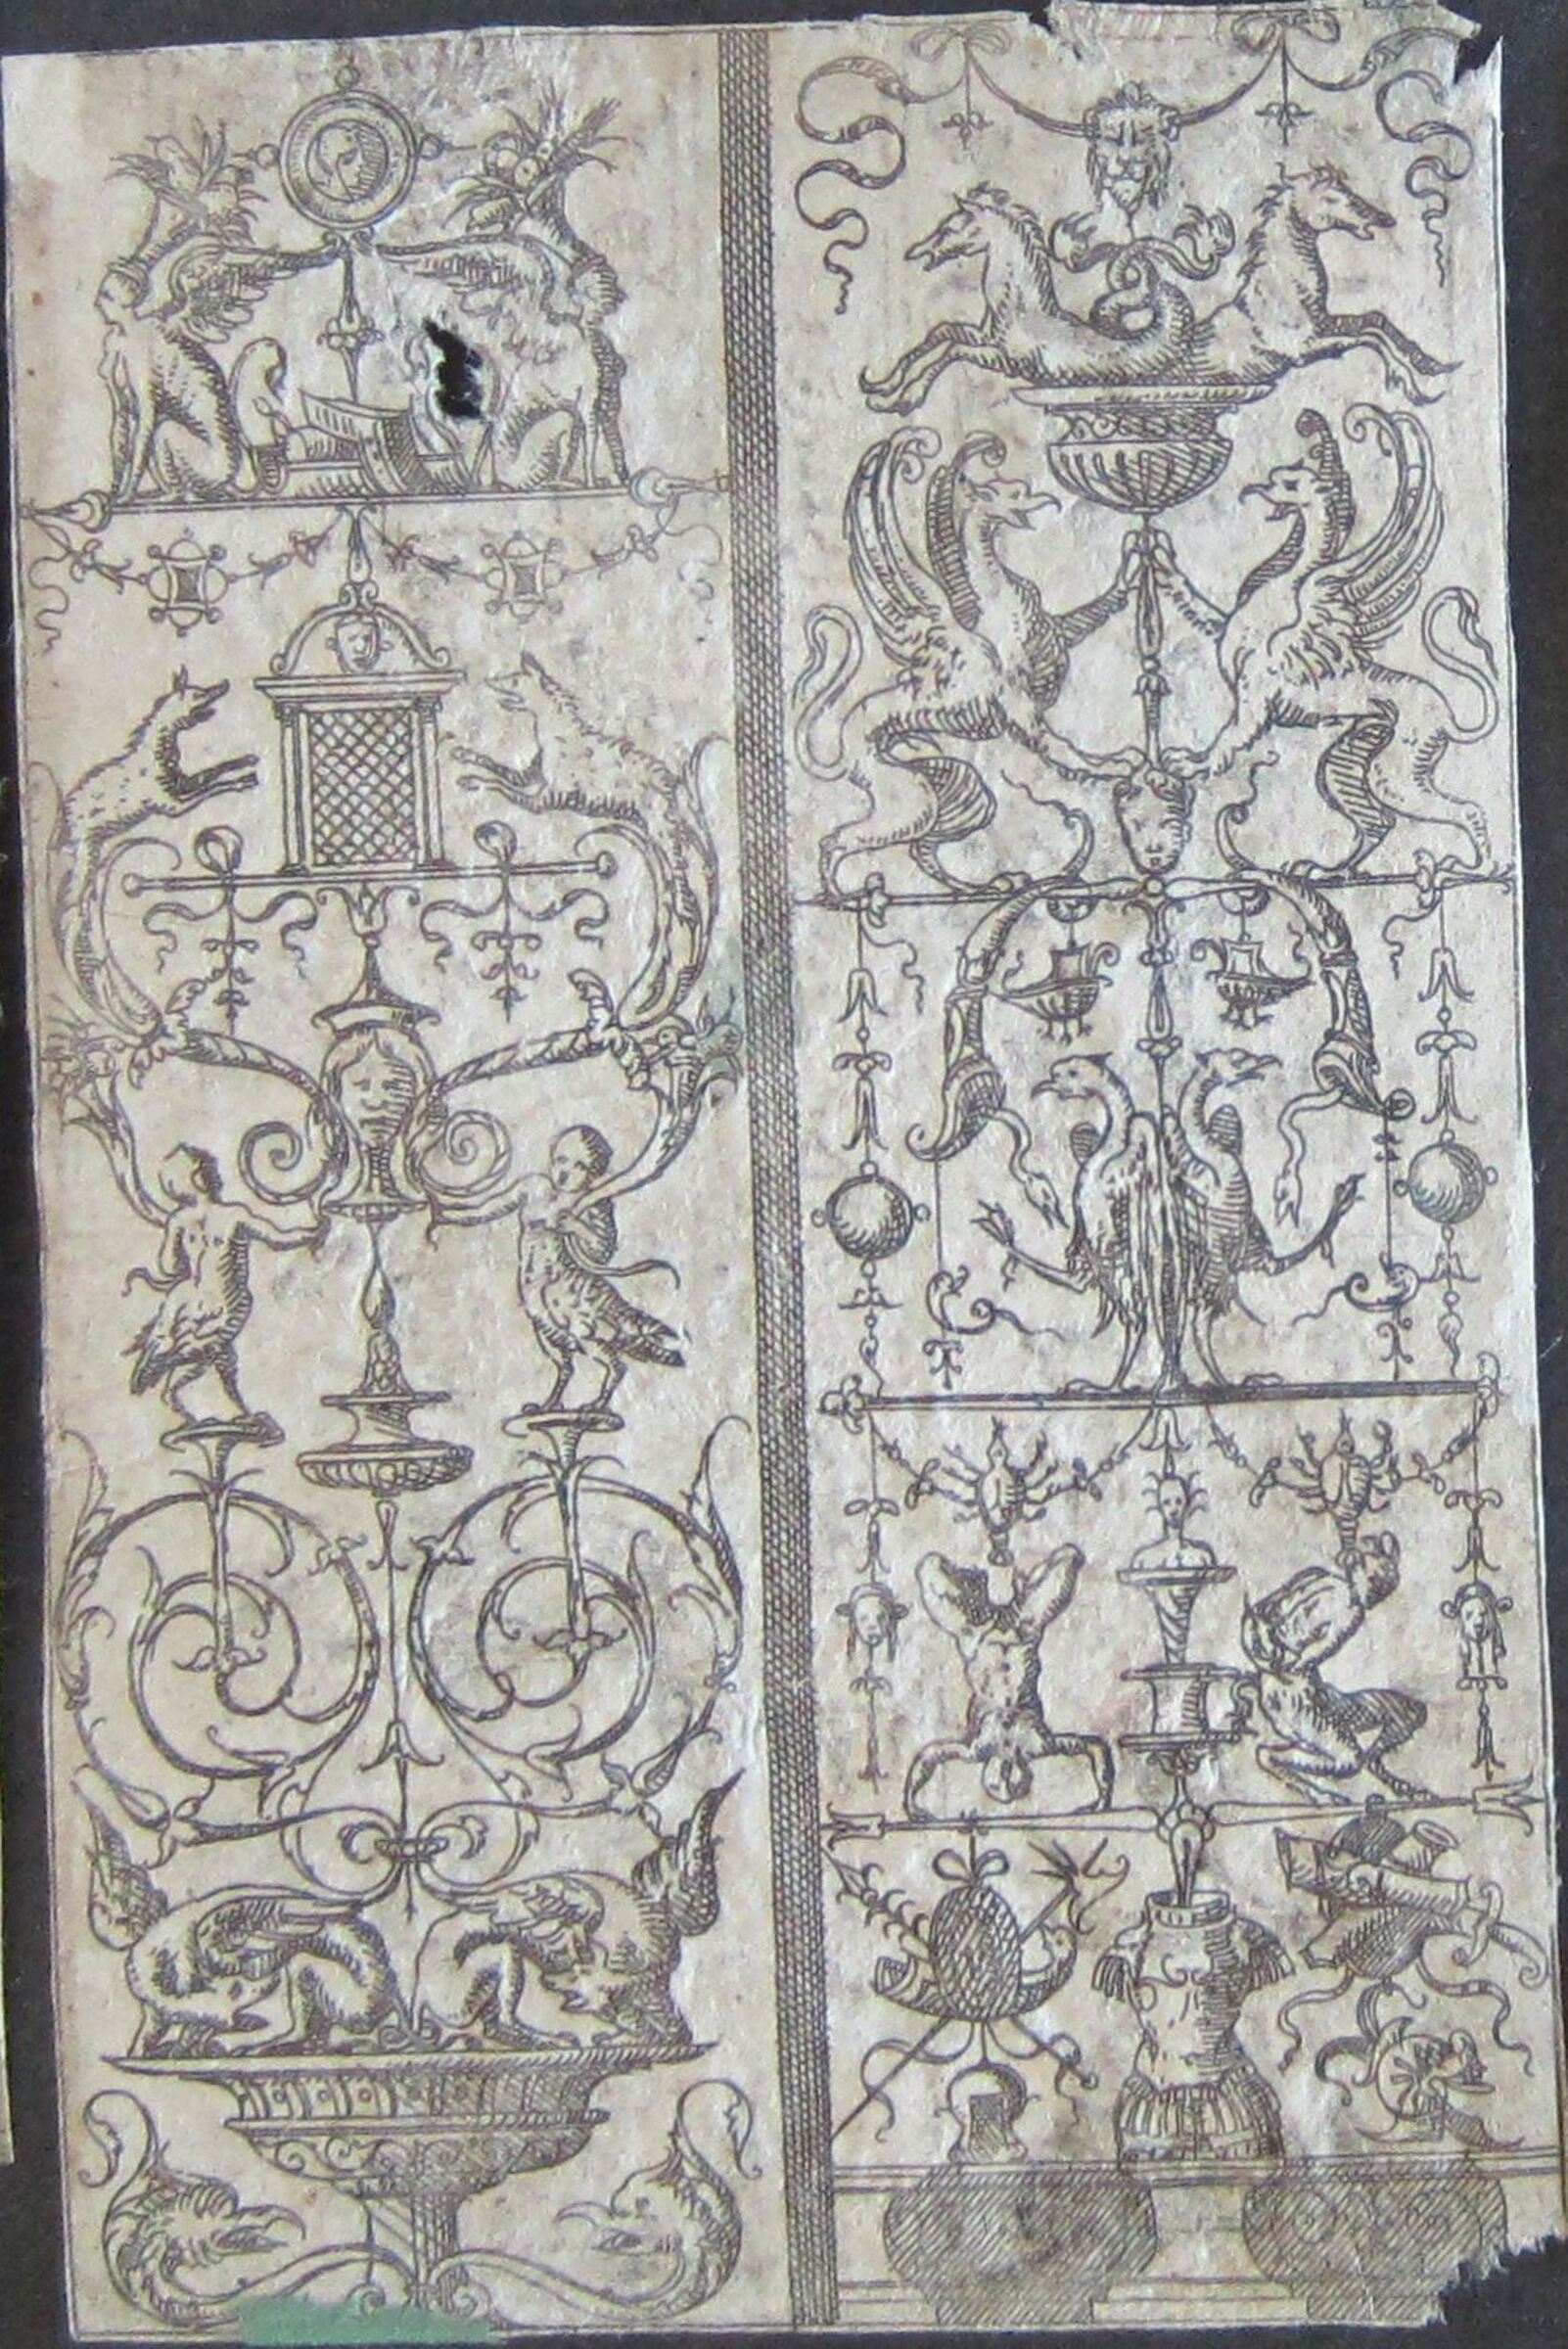 Two Grotesques Separated By A Shaded Band, The Right Grotesque With A Man Doing A Handstand